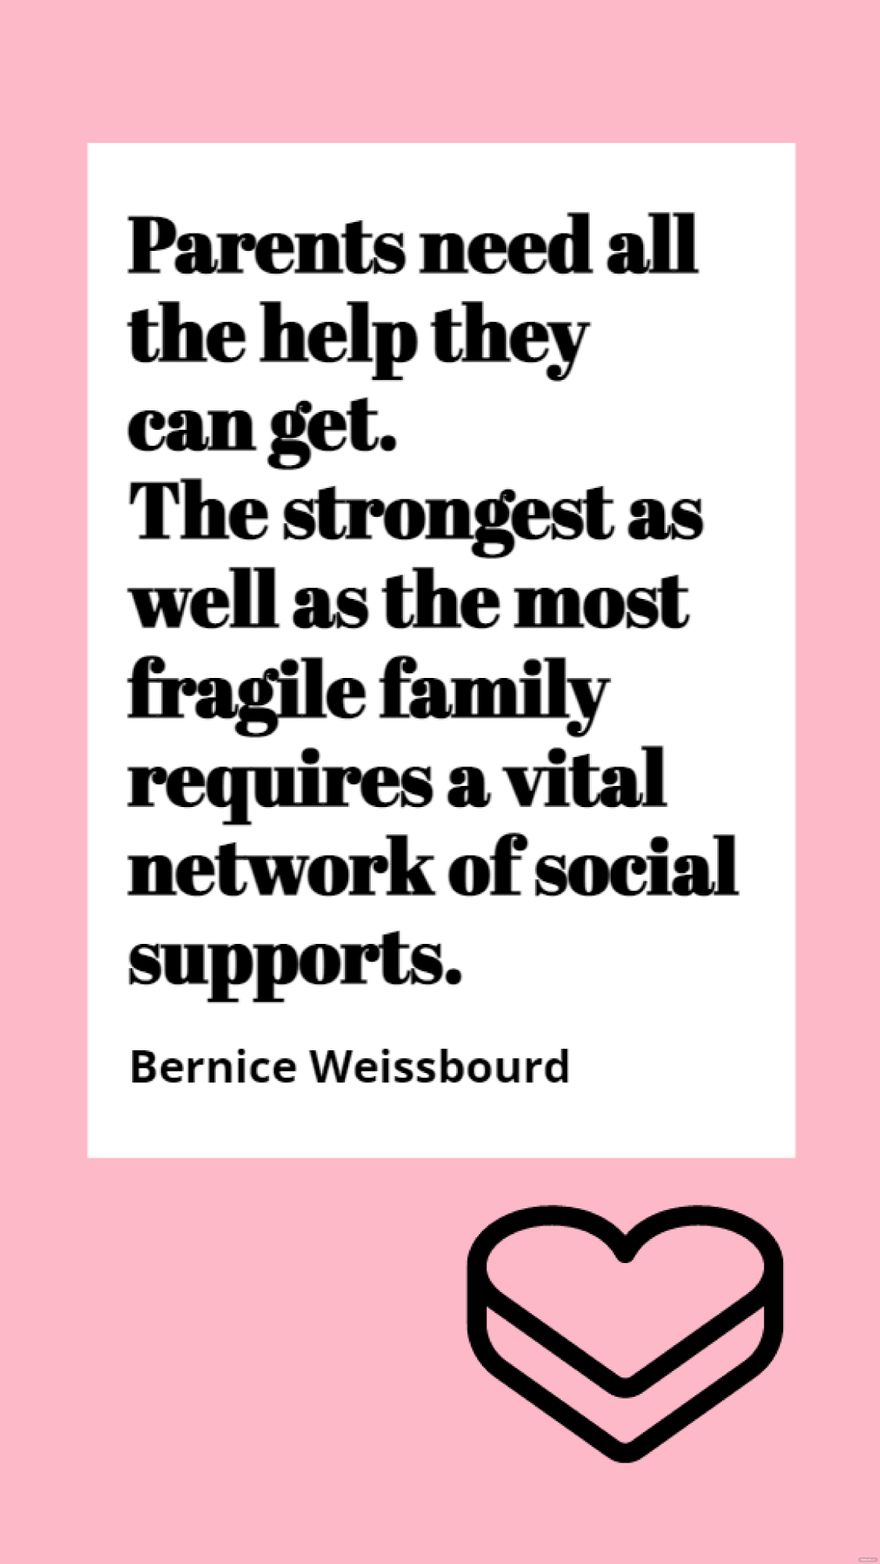 Free Bernice Weissbourd - Parents need all the help they can get. The strongest as well as the most fragile family requires a vital network of social supports. in JPG